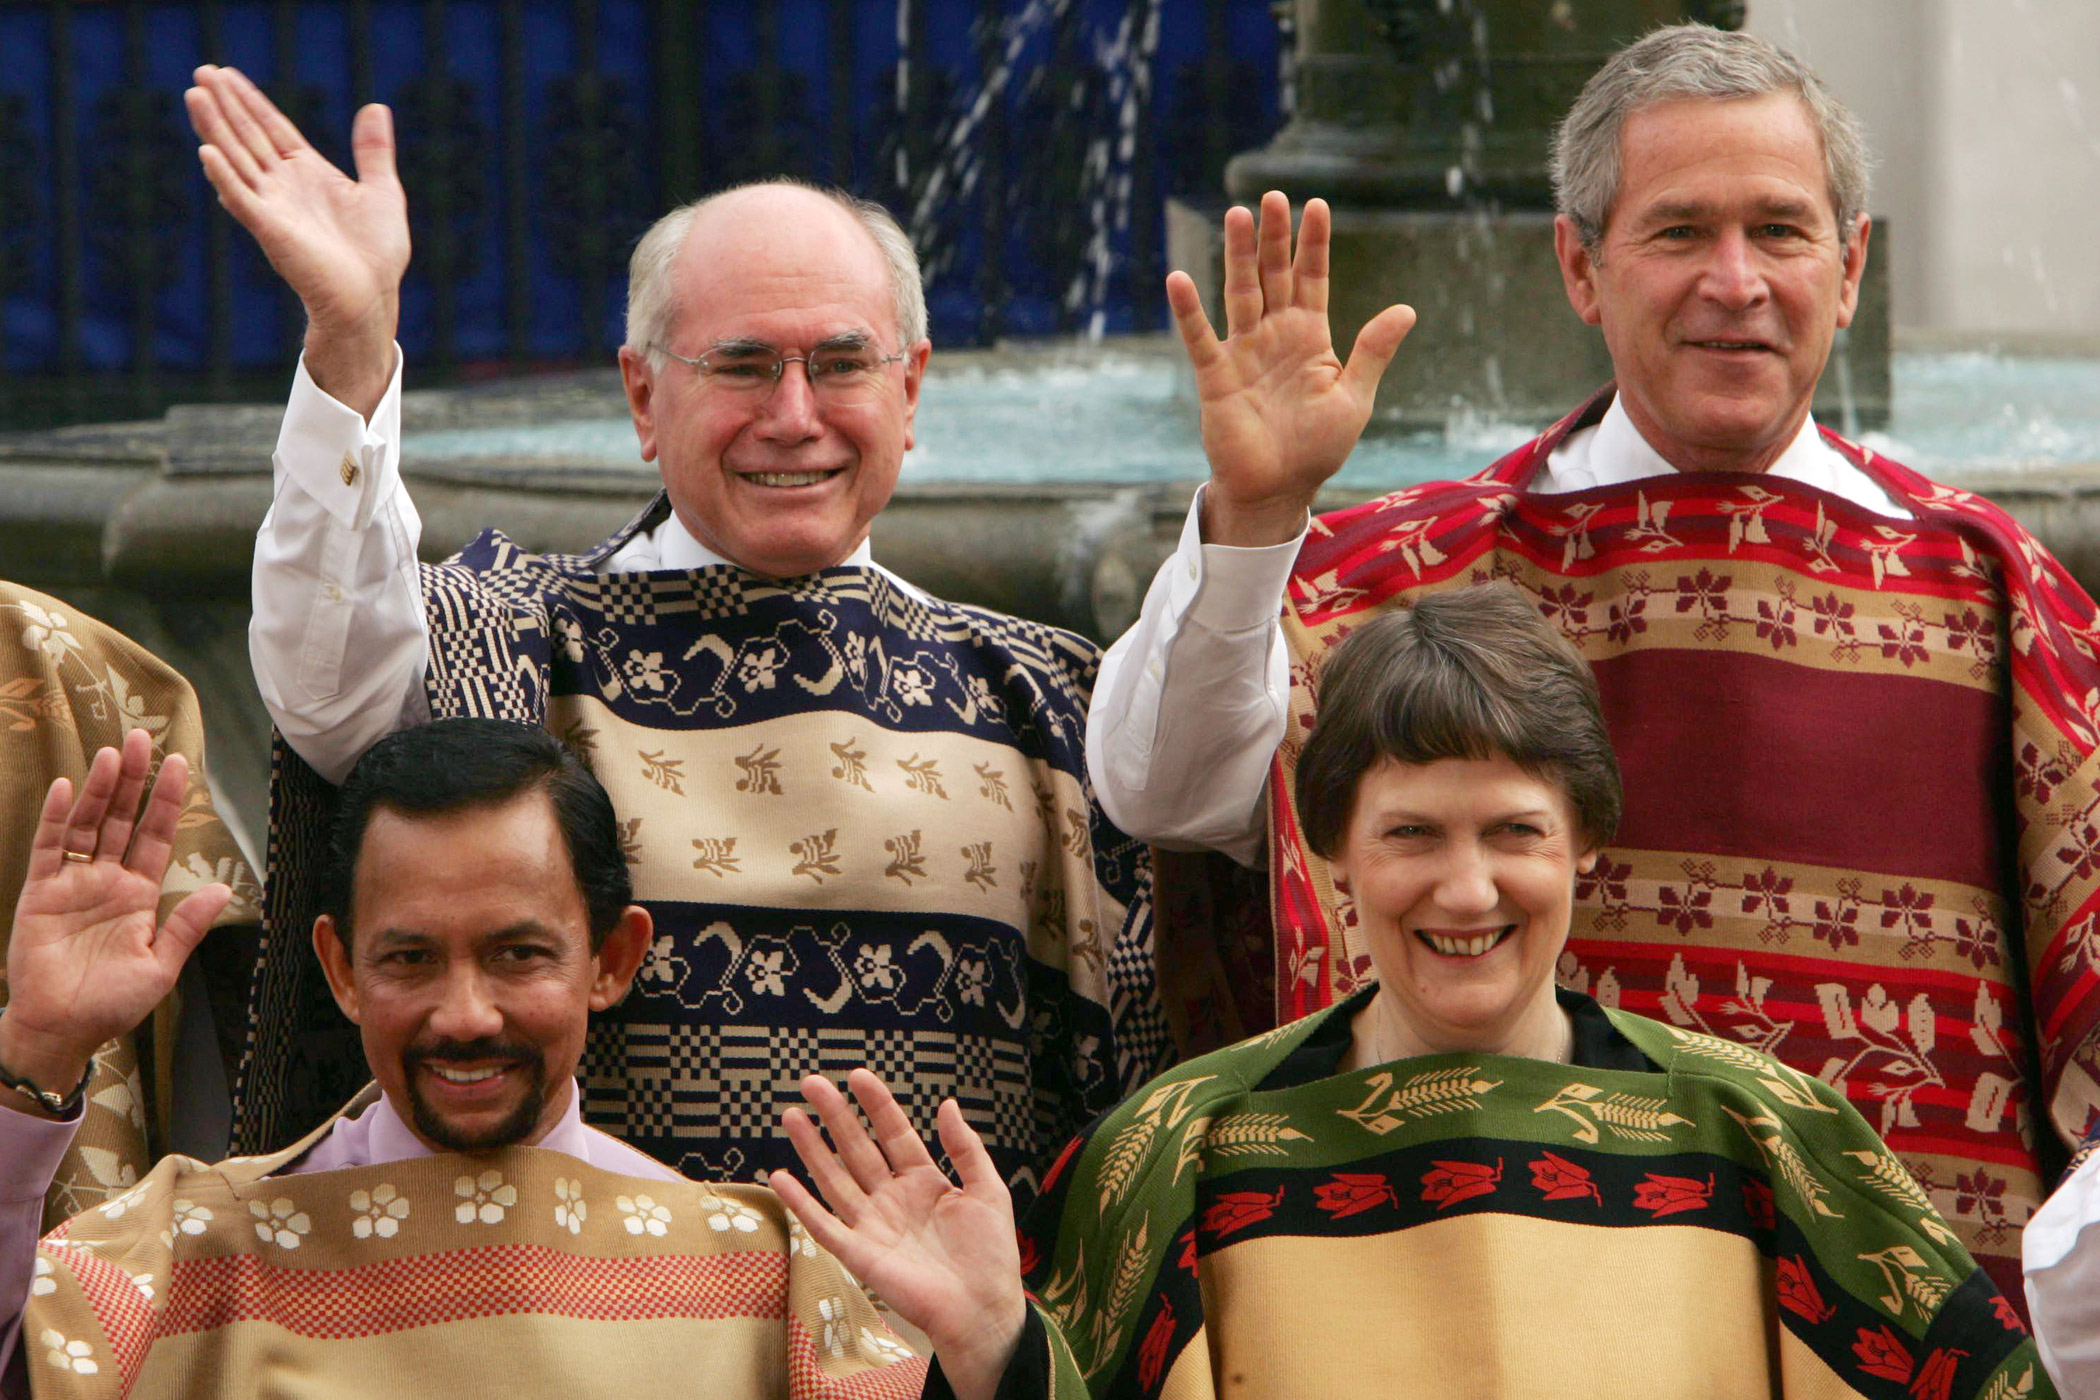 APEC leaders, clockwise from top left, Australian Prime Minister John Howard, U.S. President George Bush, Sultan Haji Hassanal Bolkiah Mujizzaddin Waddaulah, of Brunei, and New Zealand Prime Minister Helen Clark pose for a photo call wearing the Chilean traditional Chamanto at the APEC Summit in Santiago on Nov. 21, 2004.